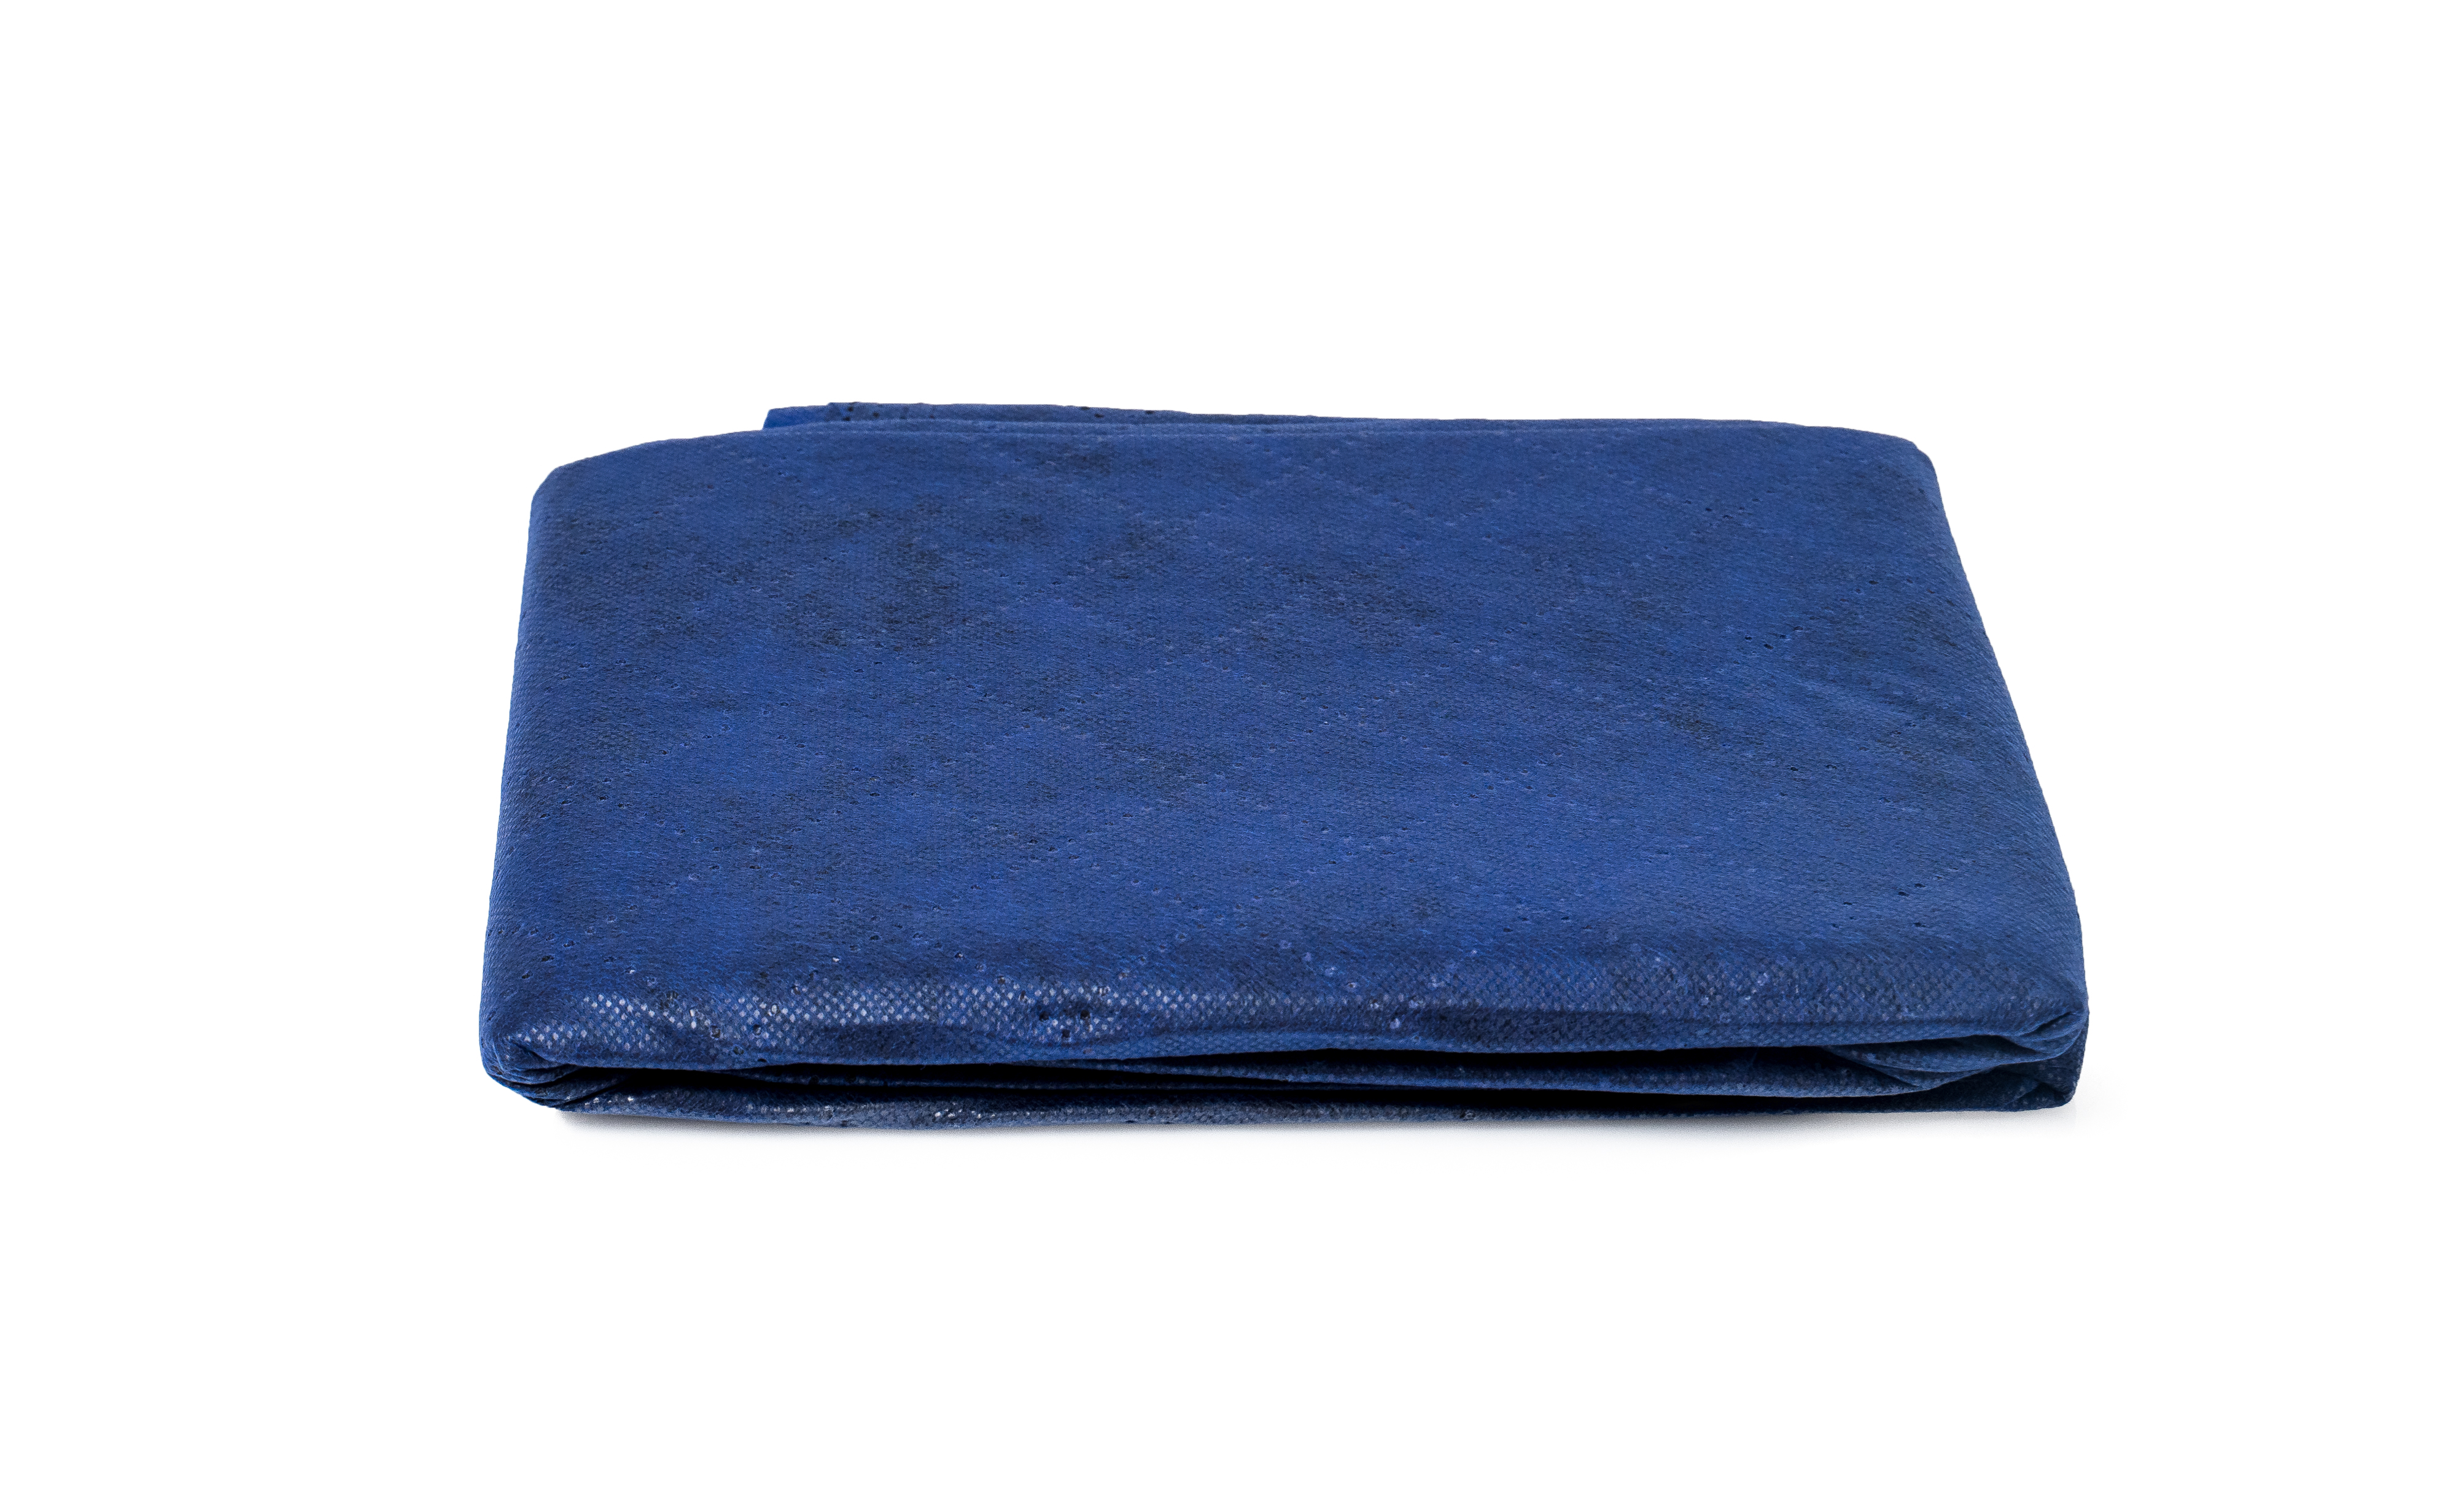 Rescue Trade Disposable Blanket, Polyester filling
Size: 1.90 x 1.10 m
Color: blue
Individually hygienically and space-savingly packed in polybags